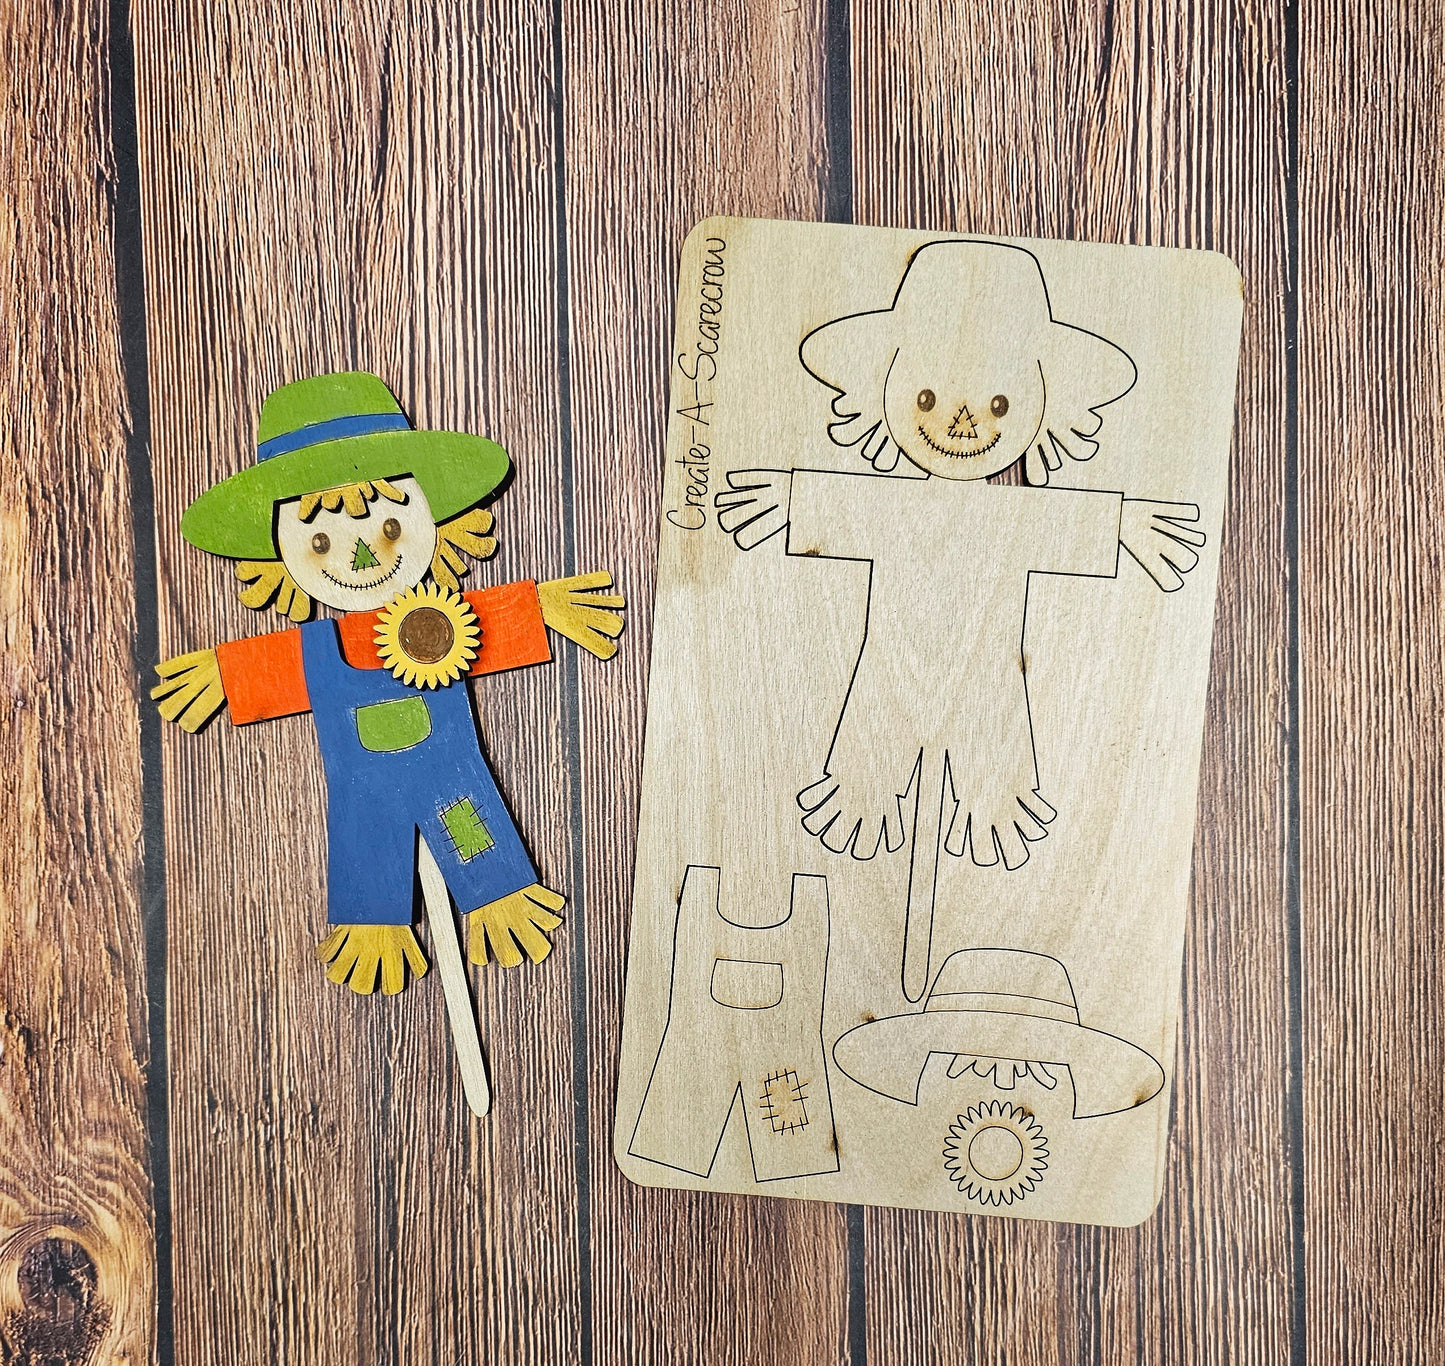 Scarecrow Kids Pop-Out - Kid's Ready to Paint Kit